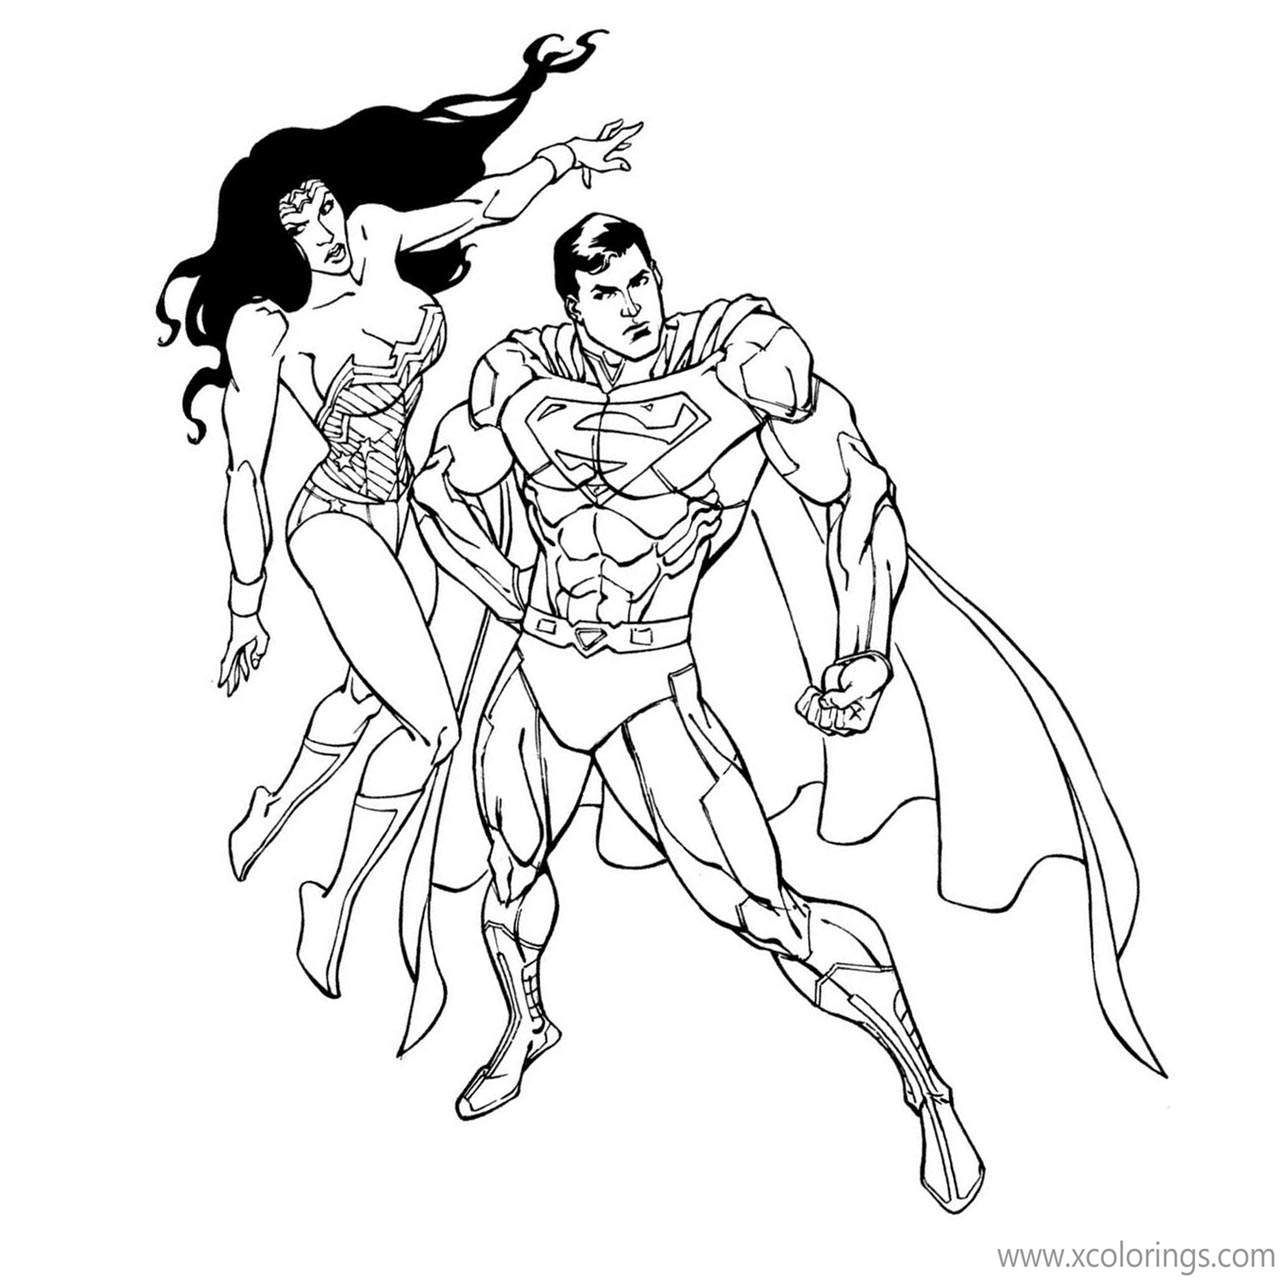 Free Animated Superman and Wonder Woman Coloring Pages printable